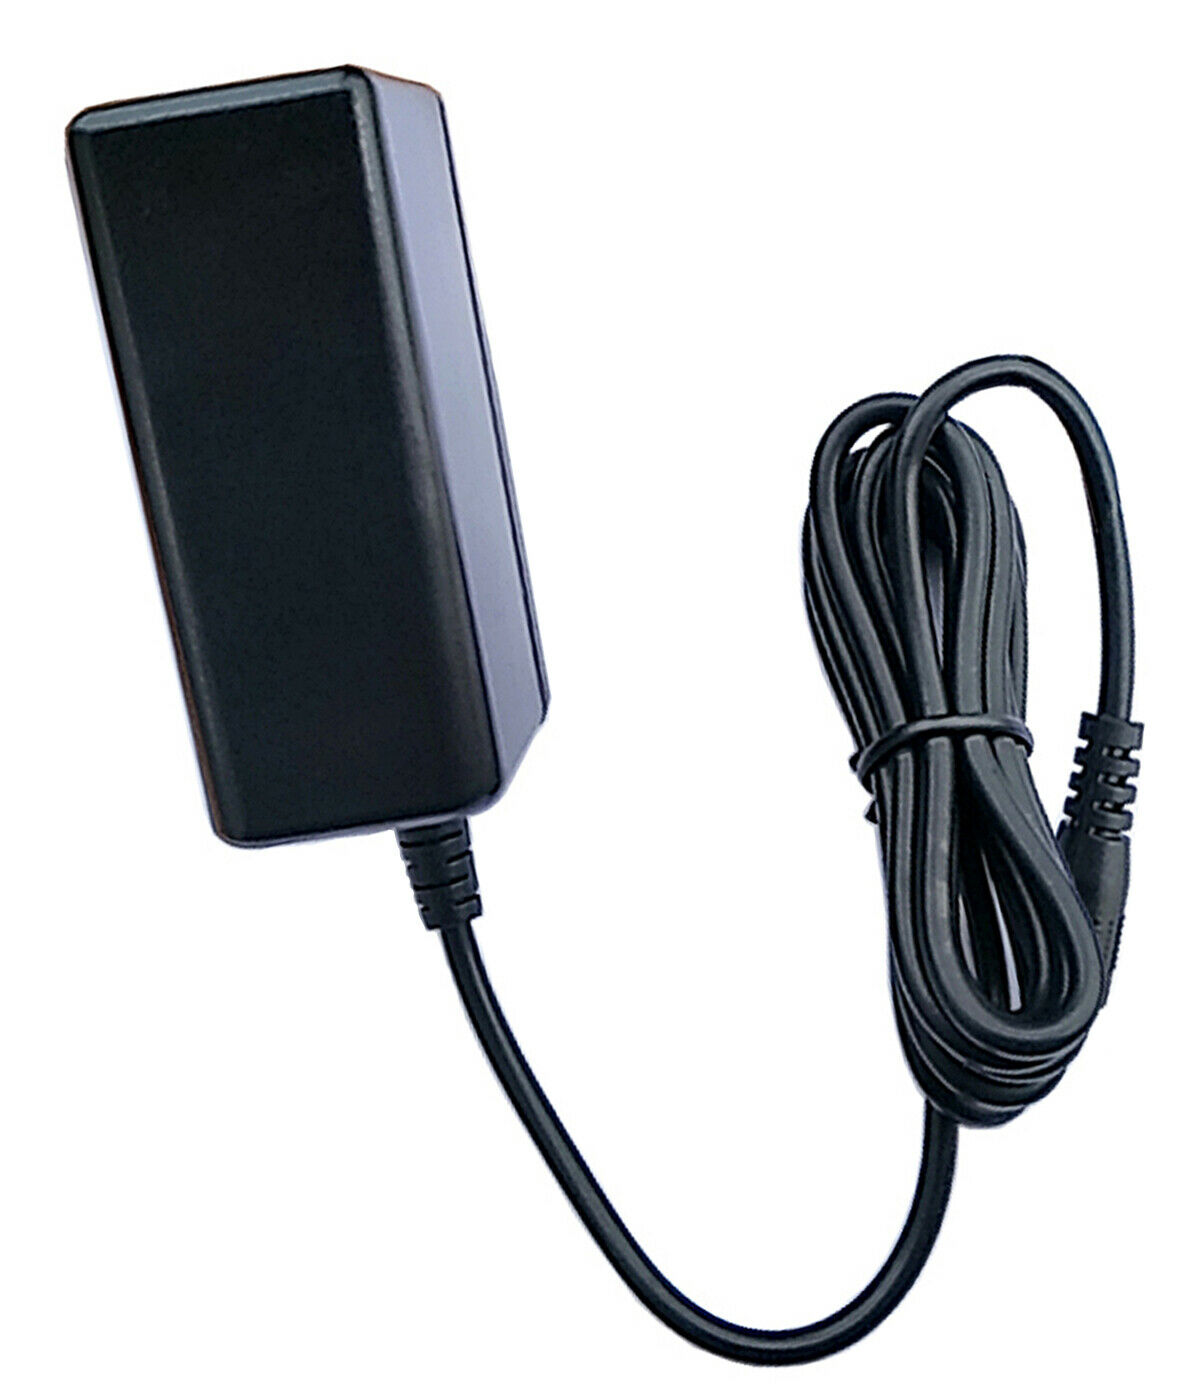 AC DC Adapter For JVC GR-S70 VHS-C SVHSC GR S70u Camcorder Power Supply Charger Type: AC/DC Adapter Features: Power